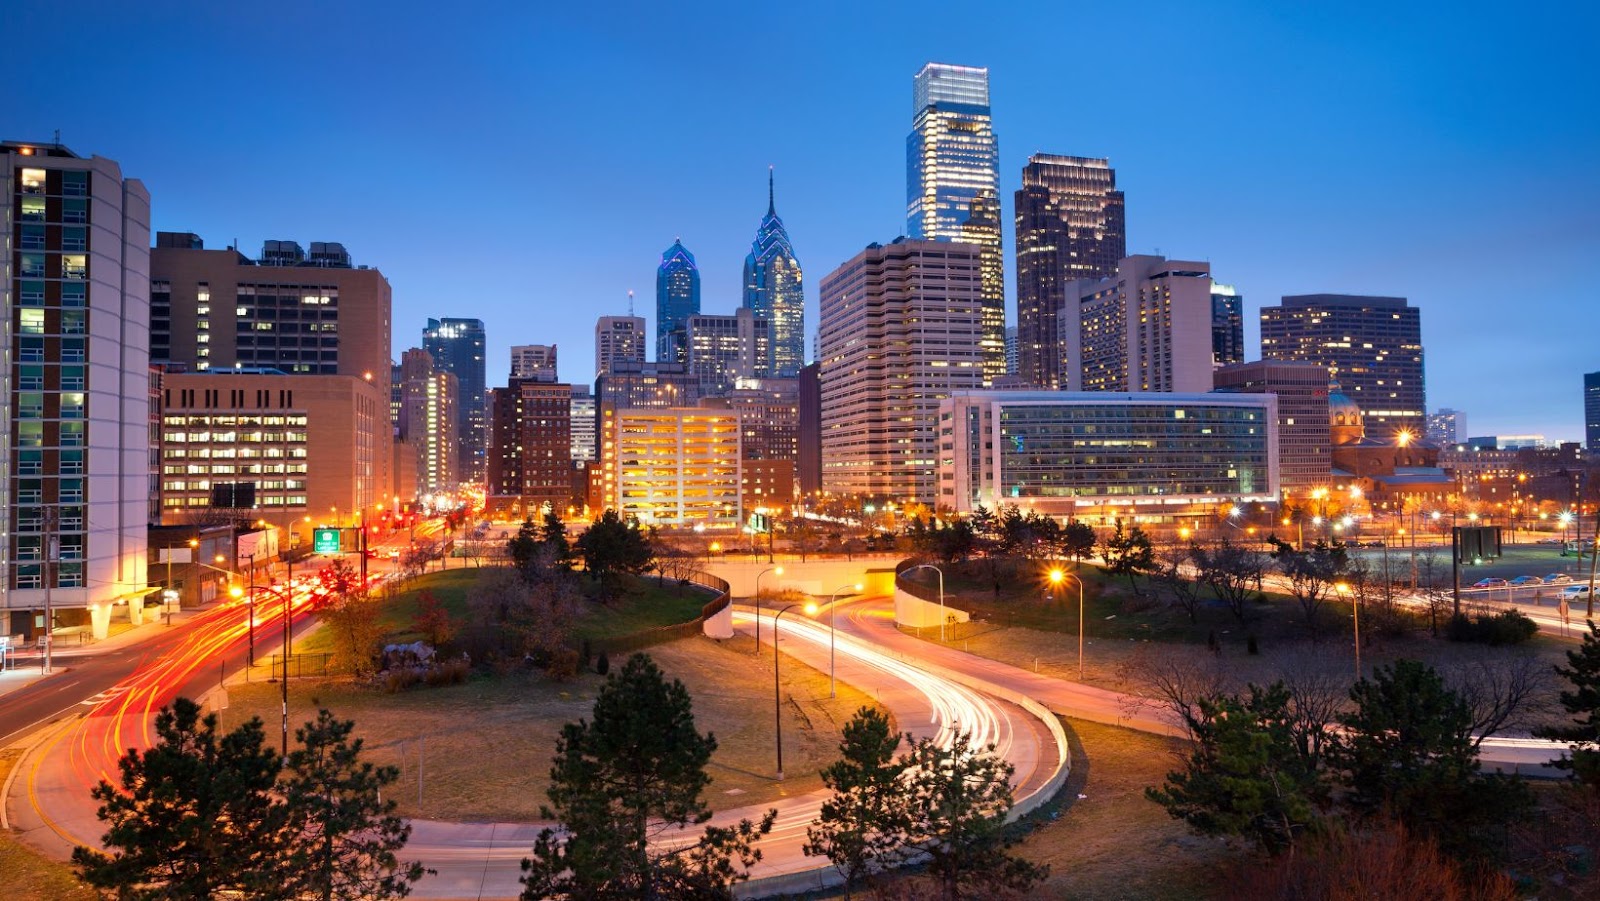 What Are Some of the Finest Neighborhoods to Stay in When Visiting Philly?